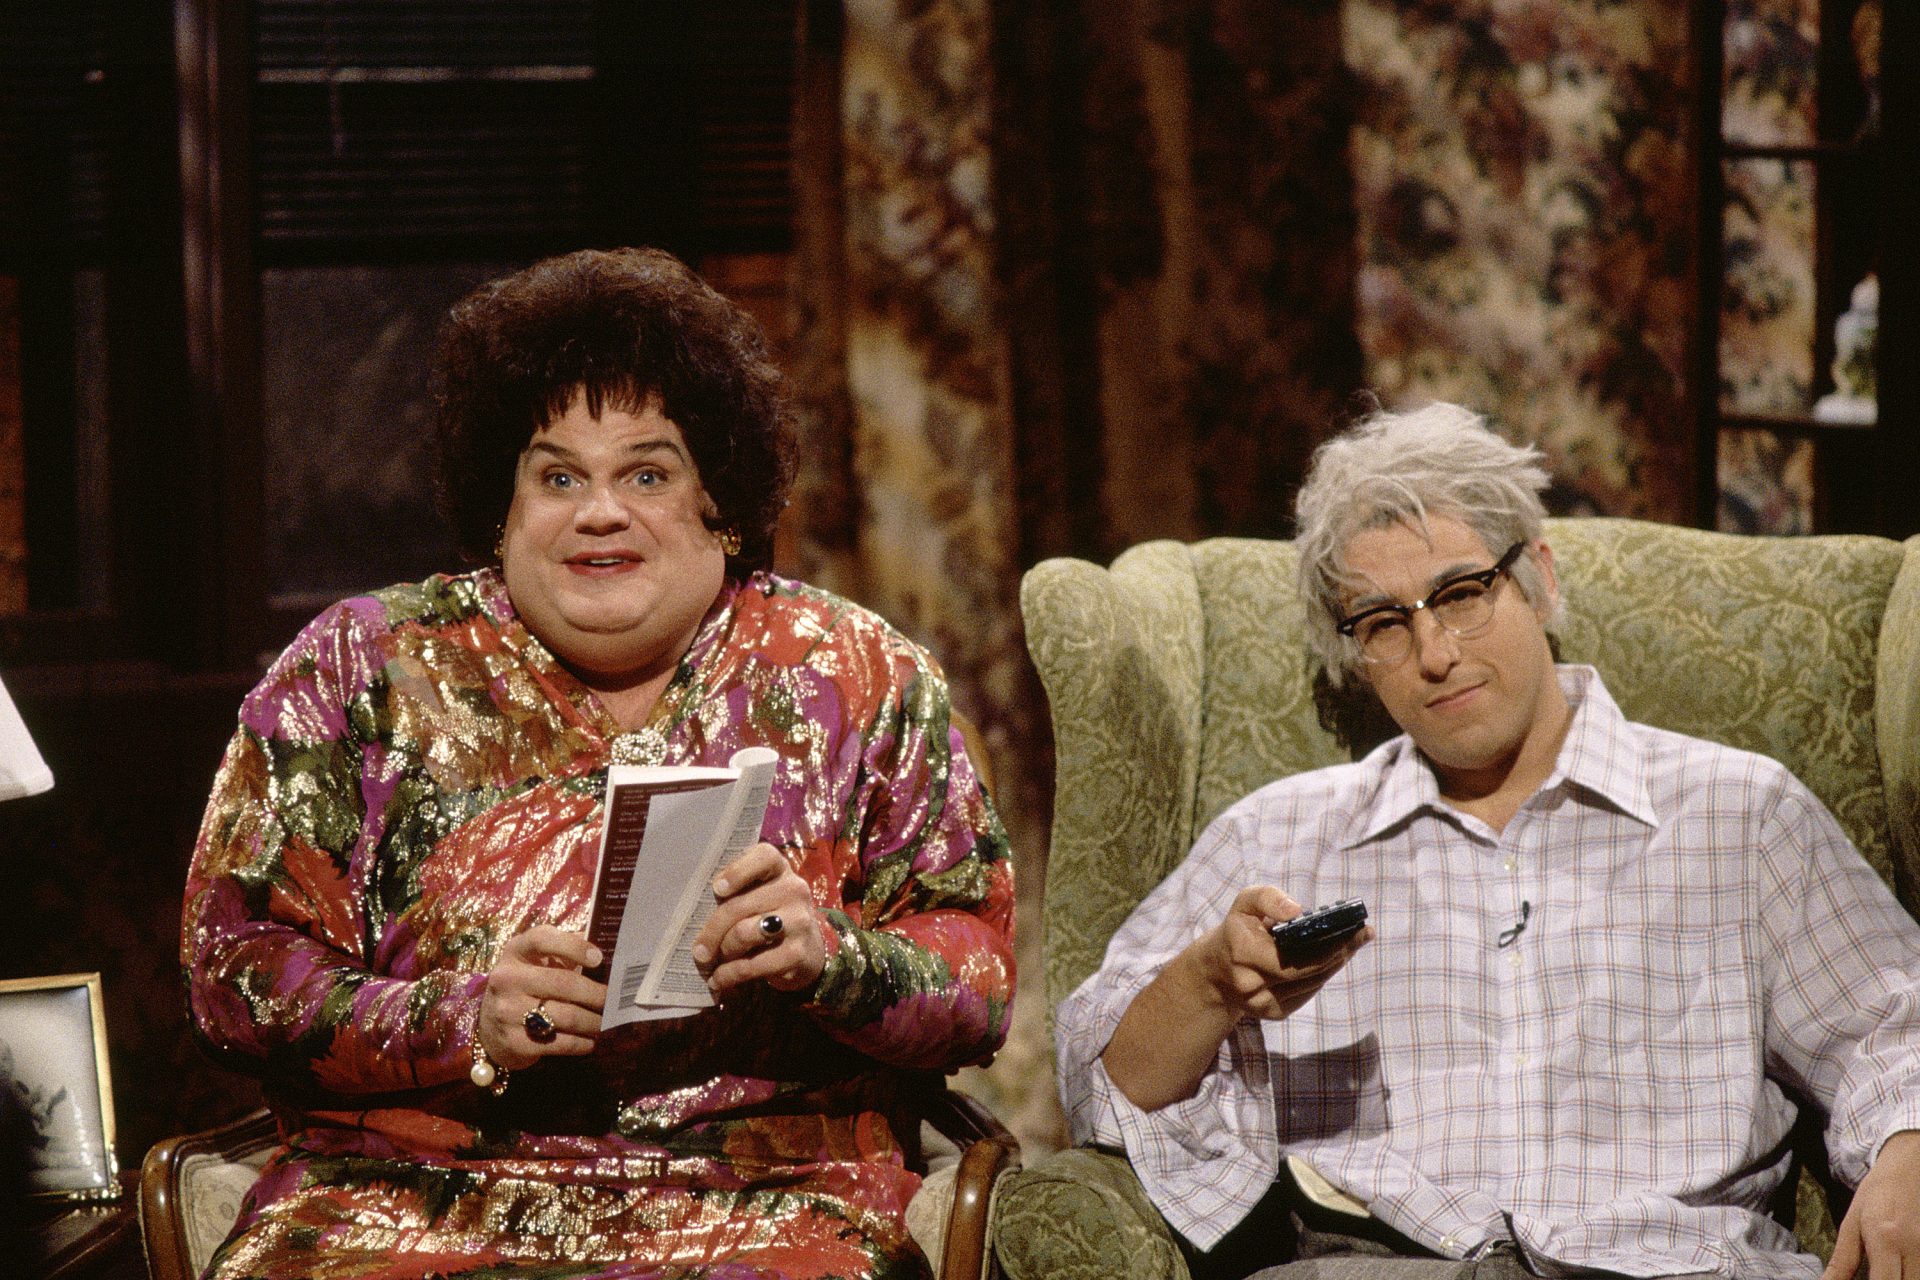 The 30 best SNL cast members of all time, ranked